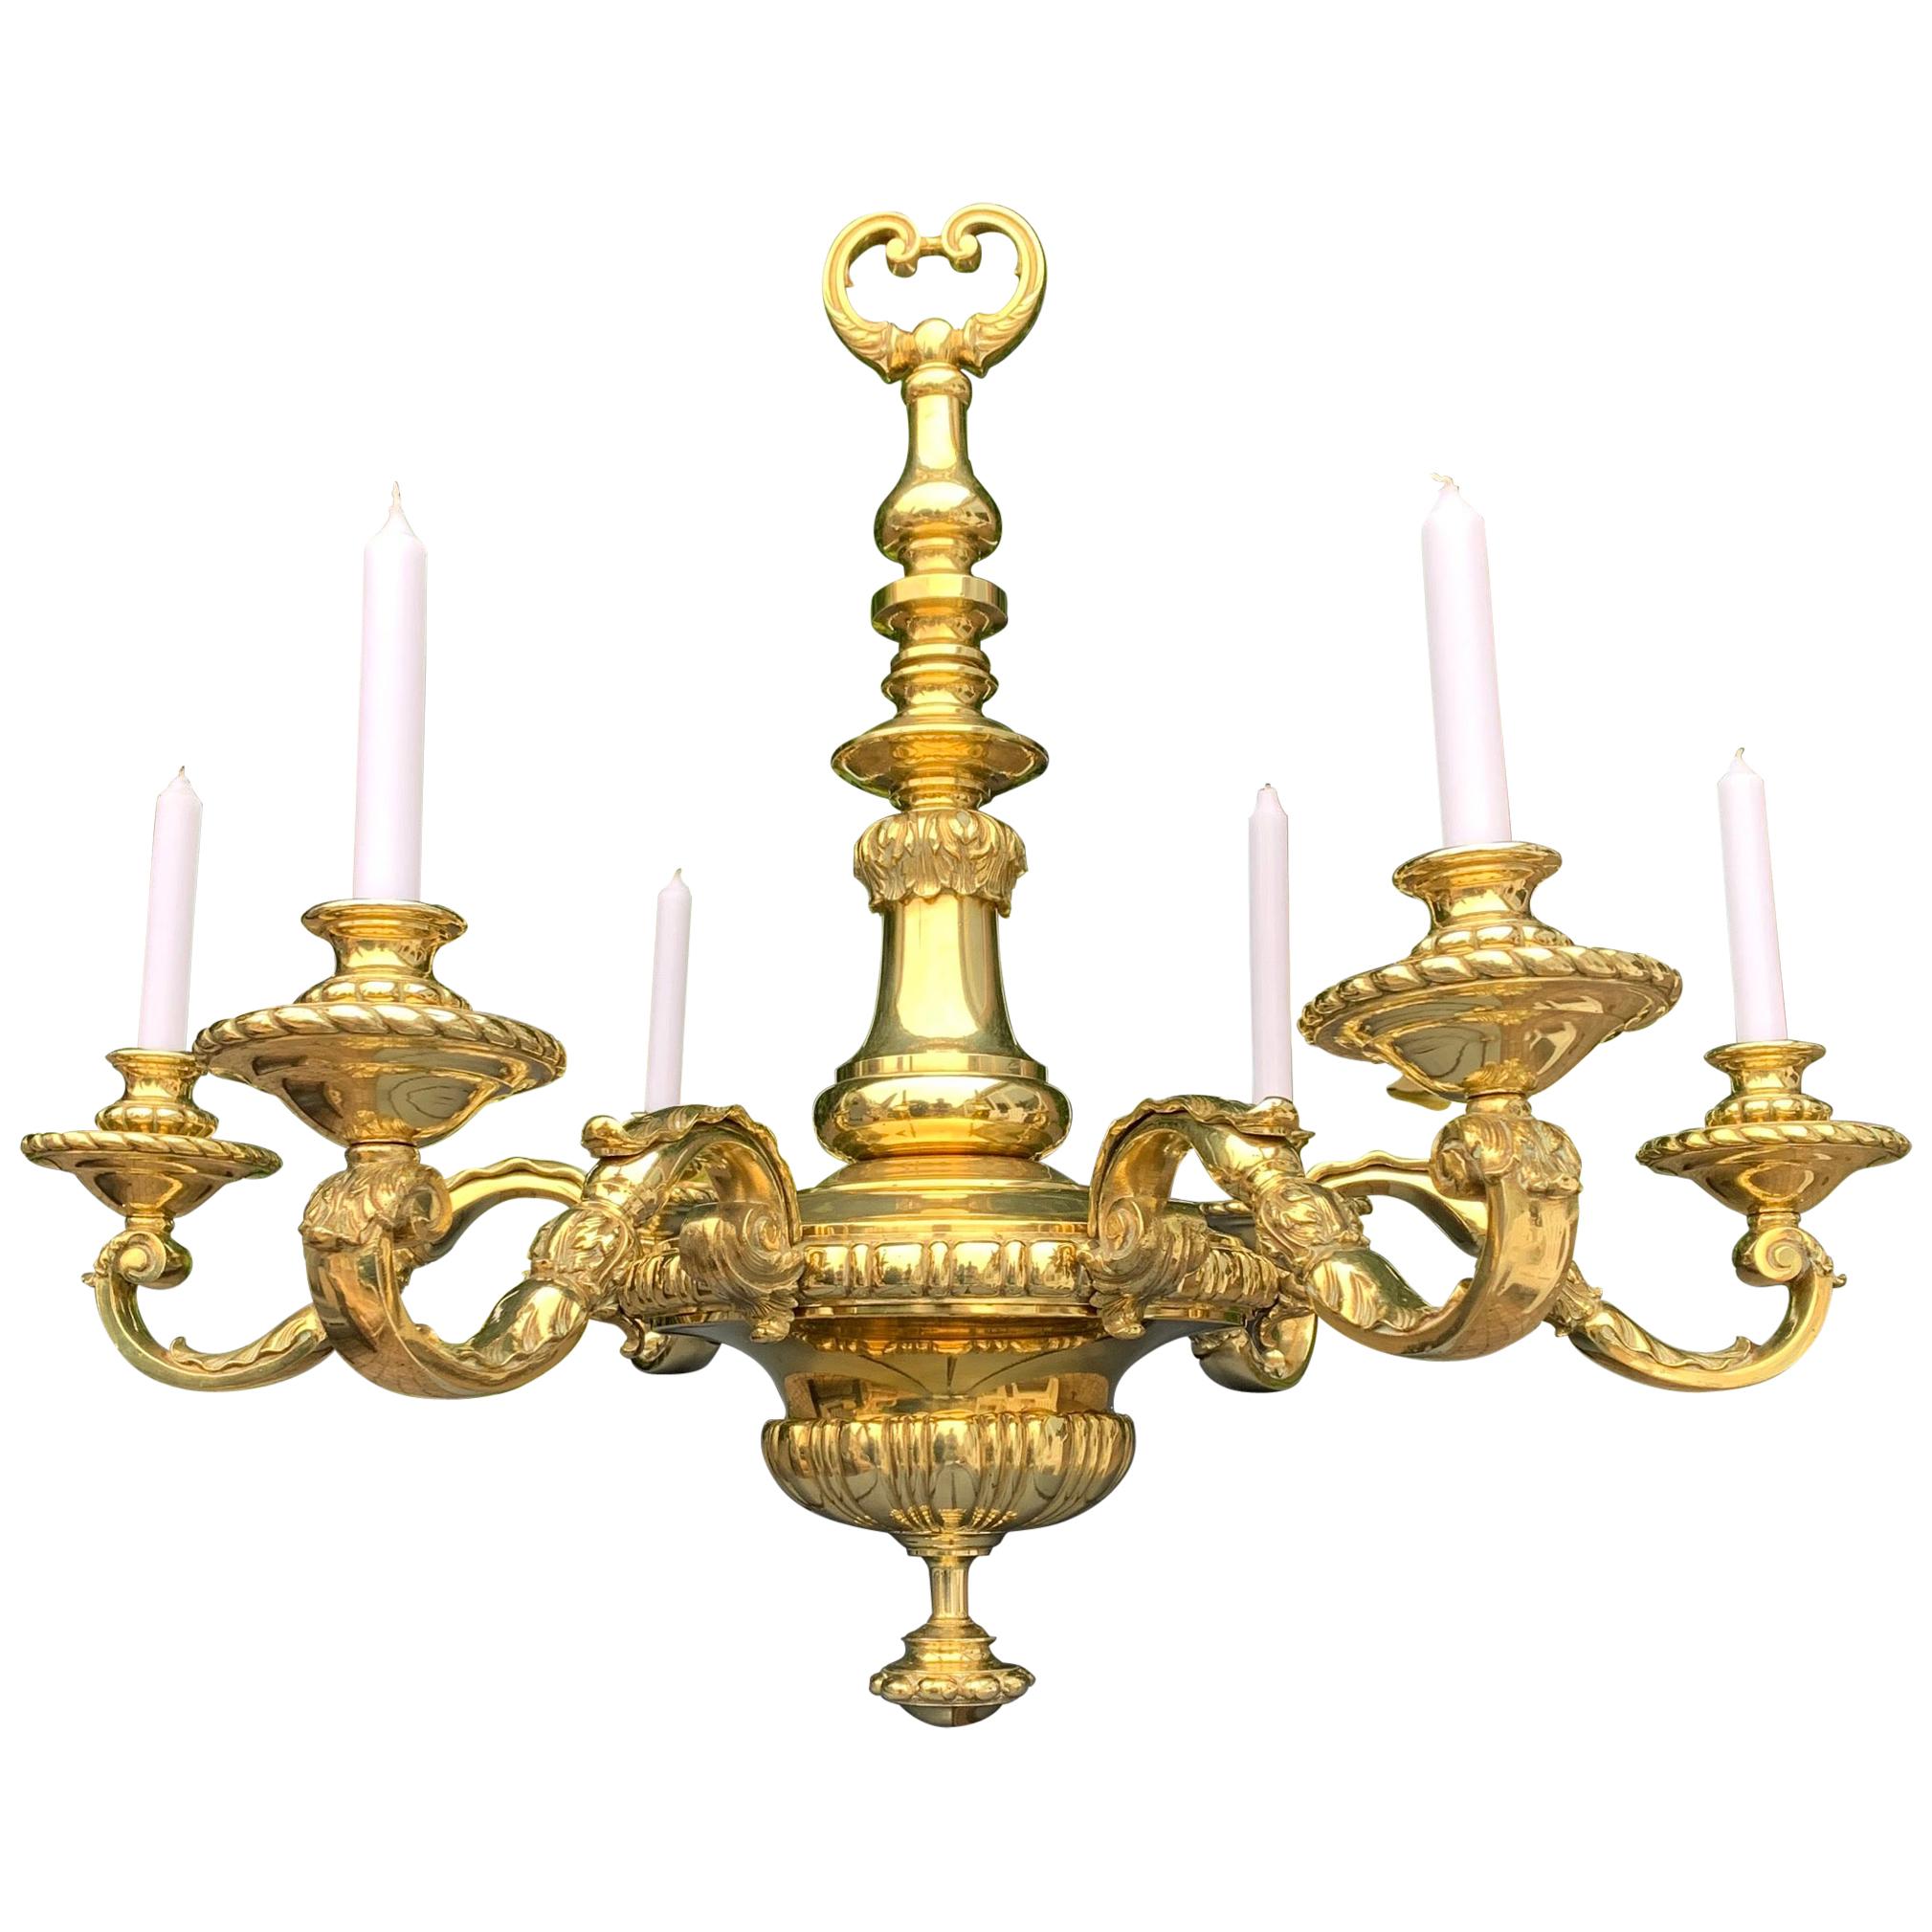 Large Antique NeoClassical Gold Color Bronze 6 arm Candle or Electric Chandelier